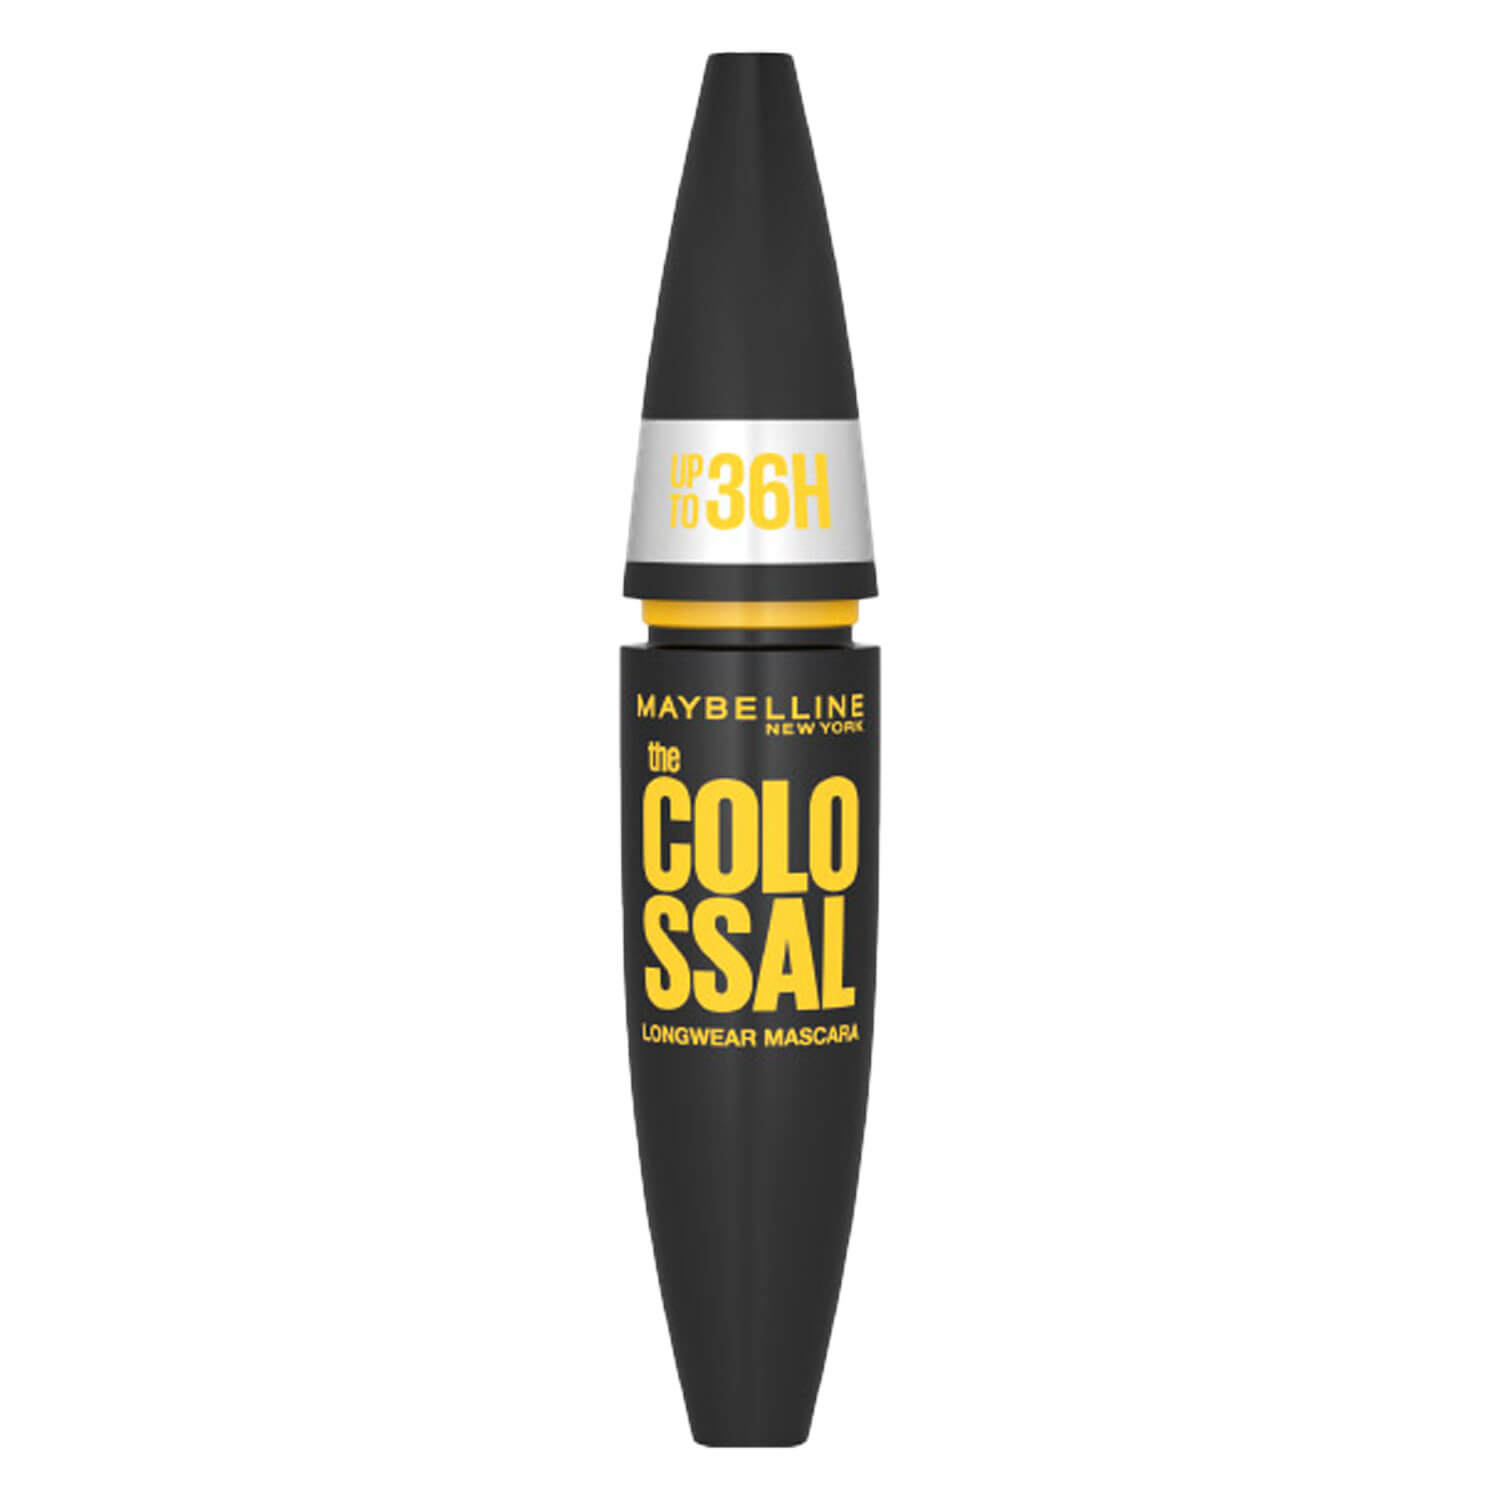 Maybelline New York Maybelline Ny Mascara Colossal 36h Waterproof Mascara Black Perfecthair Ch